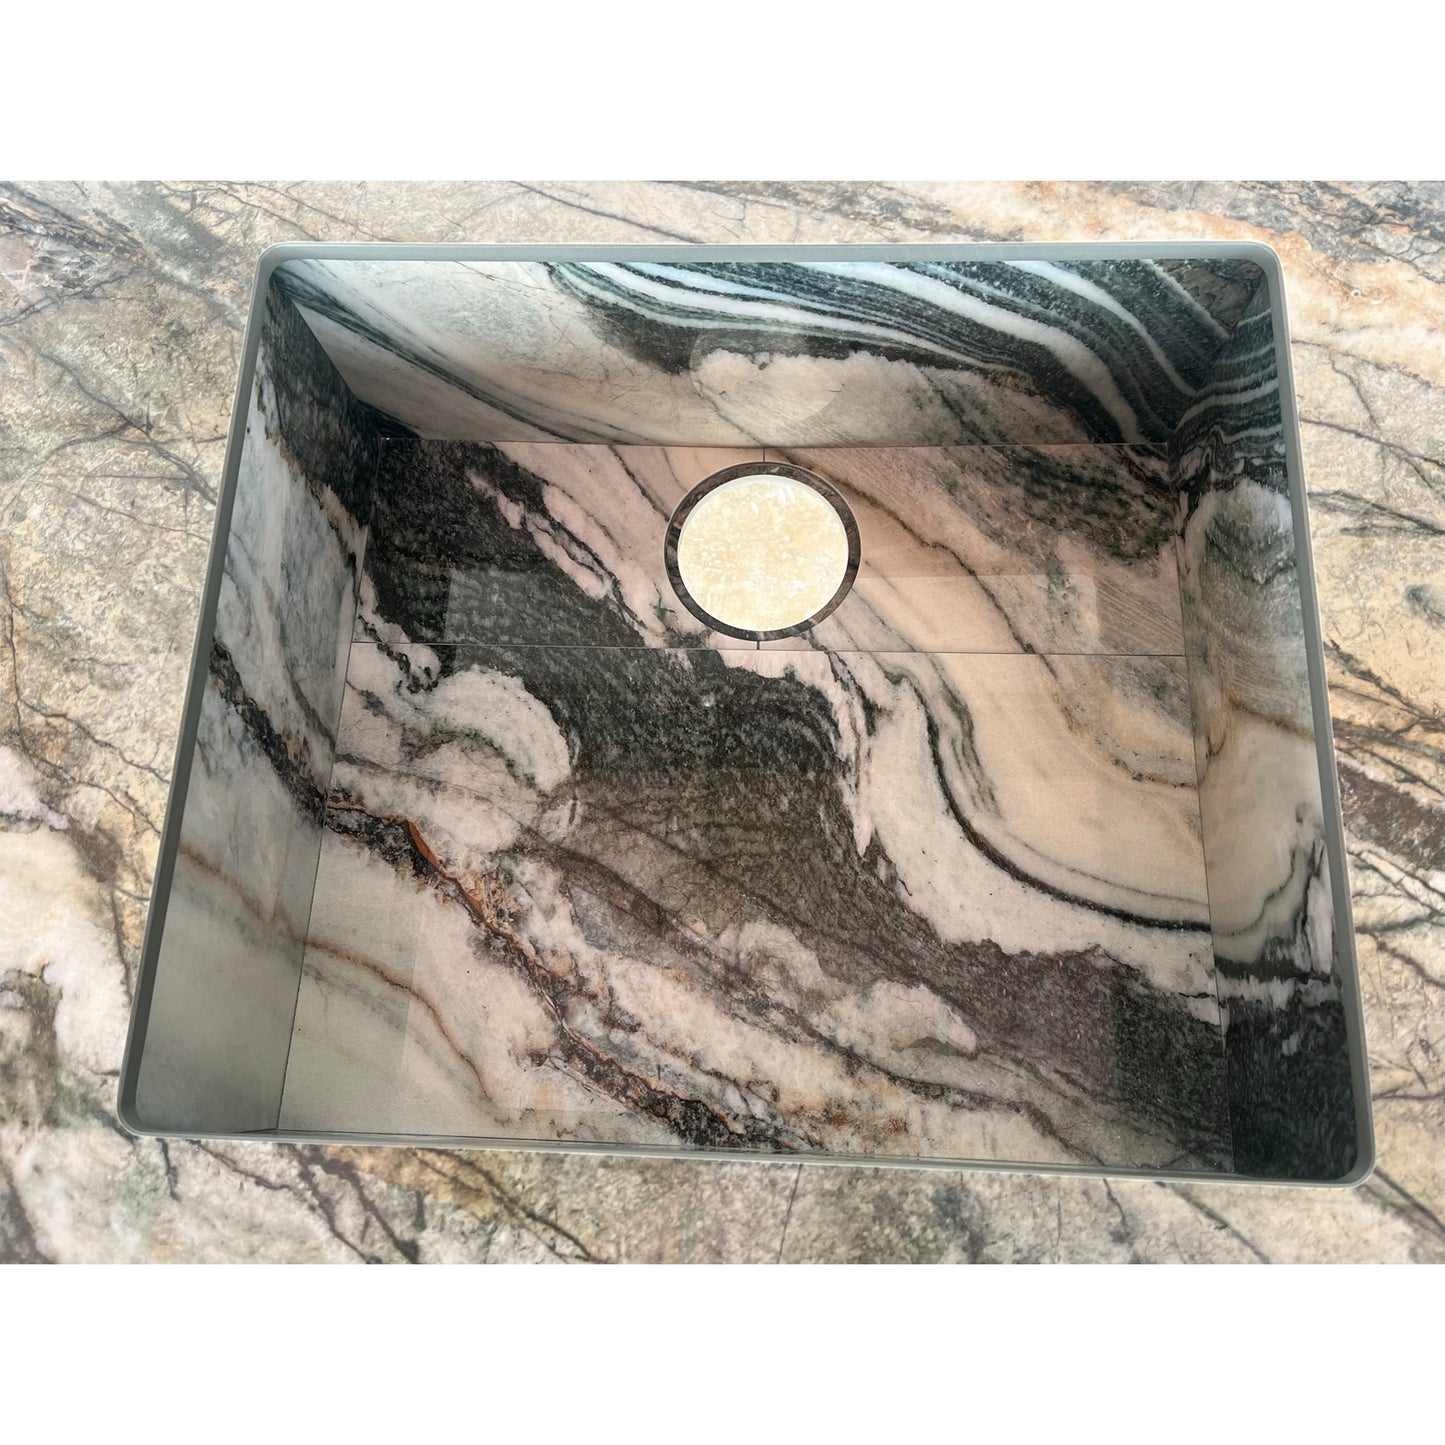 HANDCRAFTED PEACOCK HIGH ENGINEERED PORCELAIN SINK